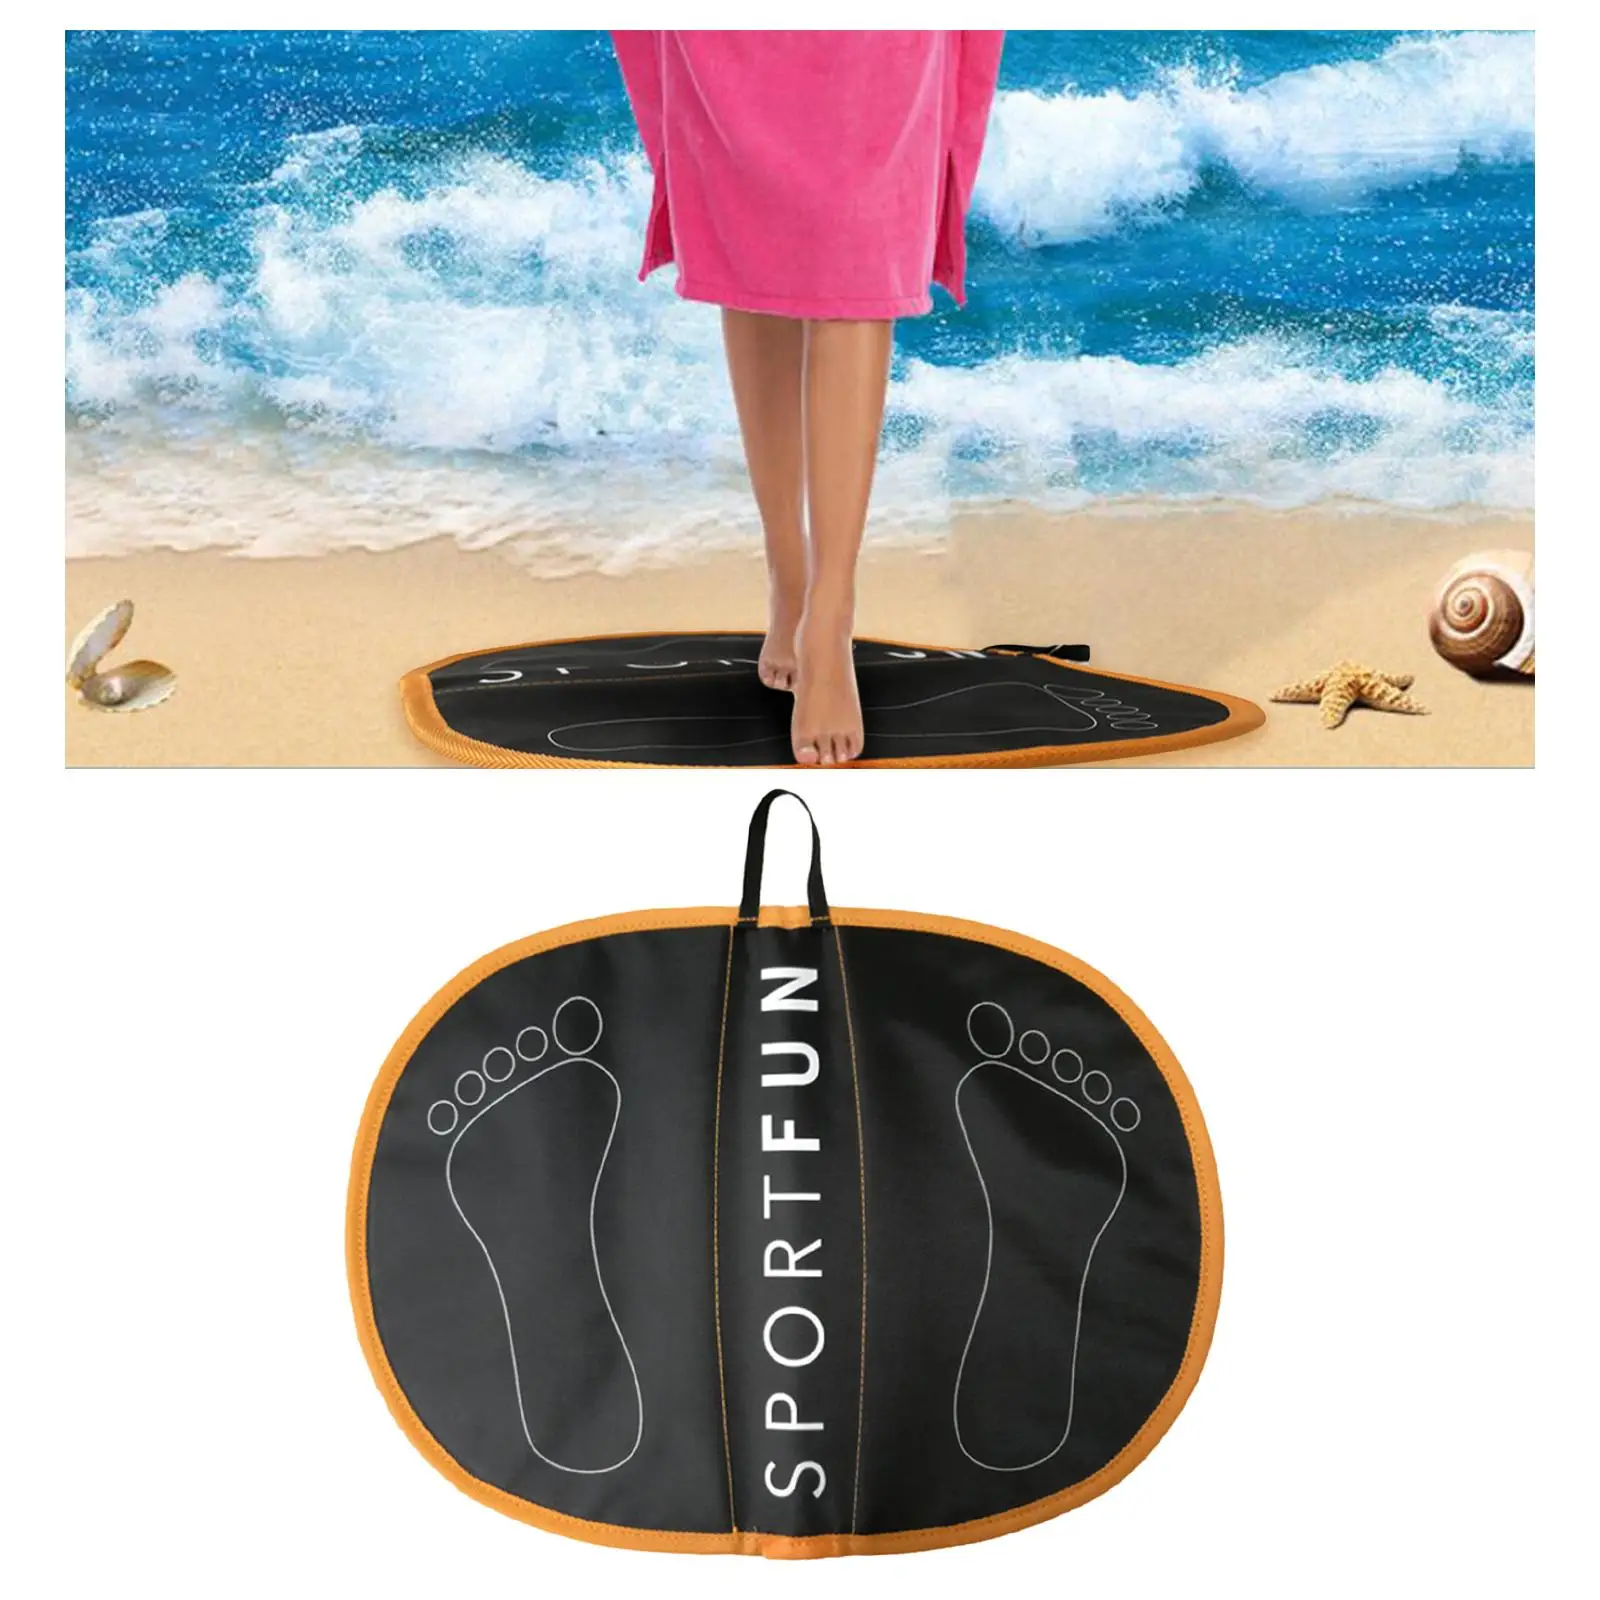 Portable EVA Wetsuit Changing Mat Feet Pad Water Sports Surfing Diving